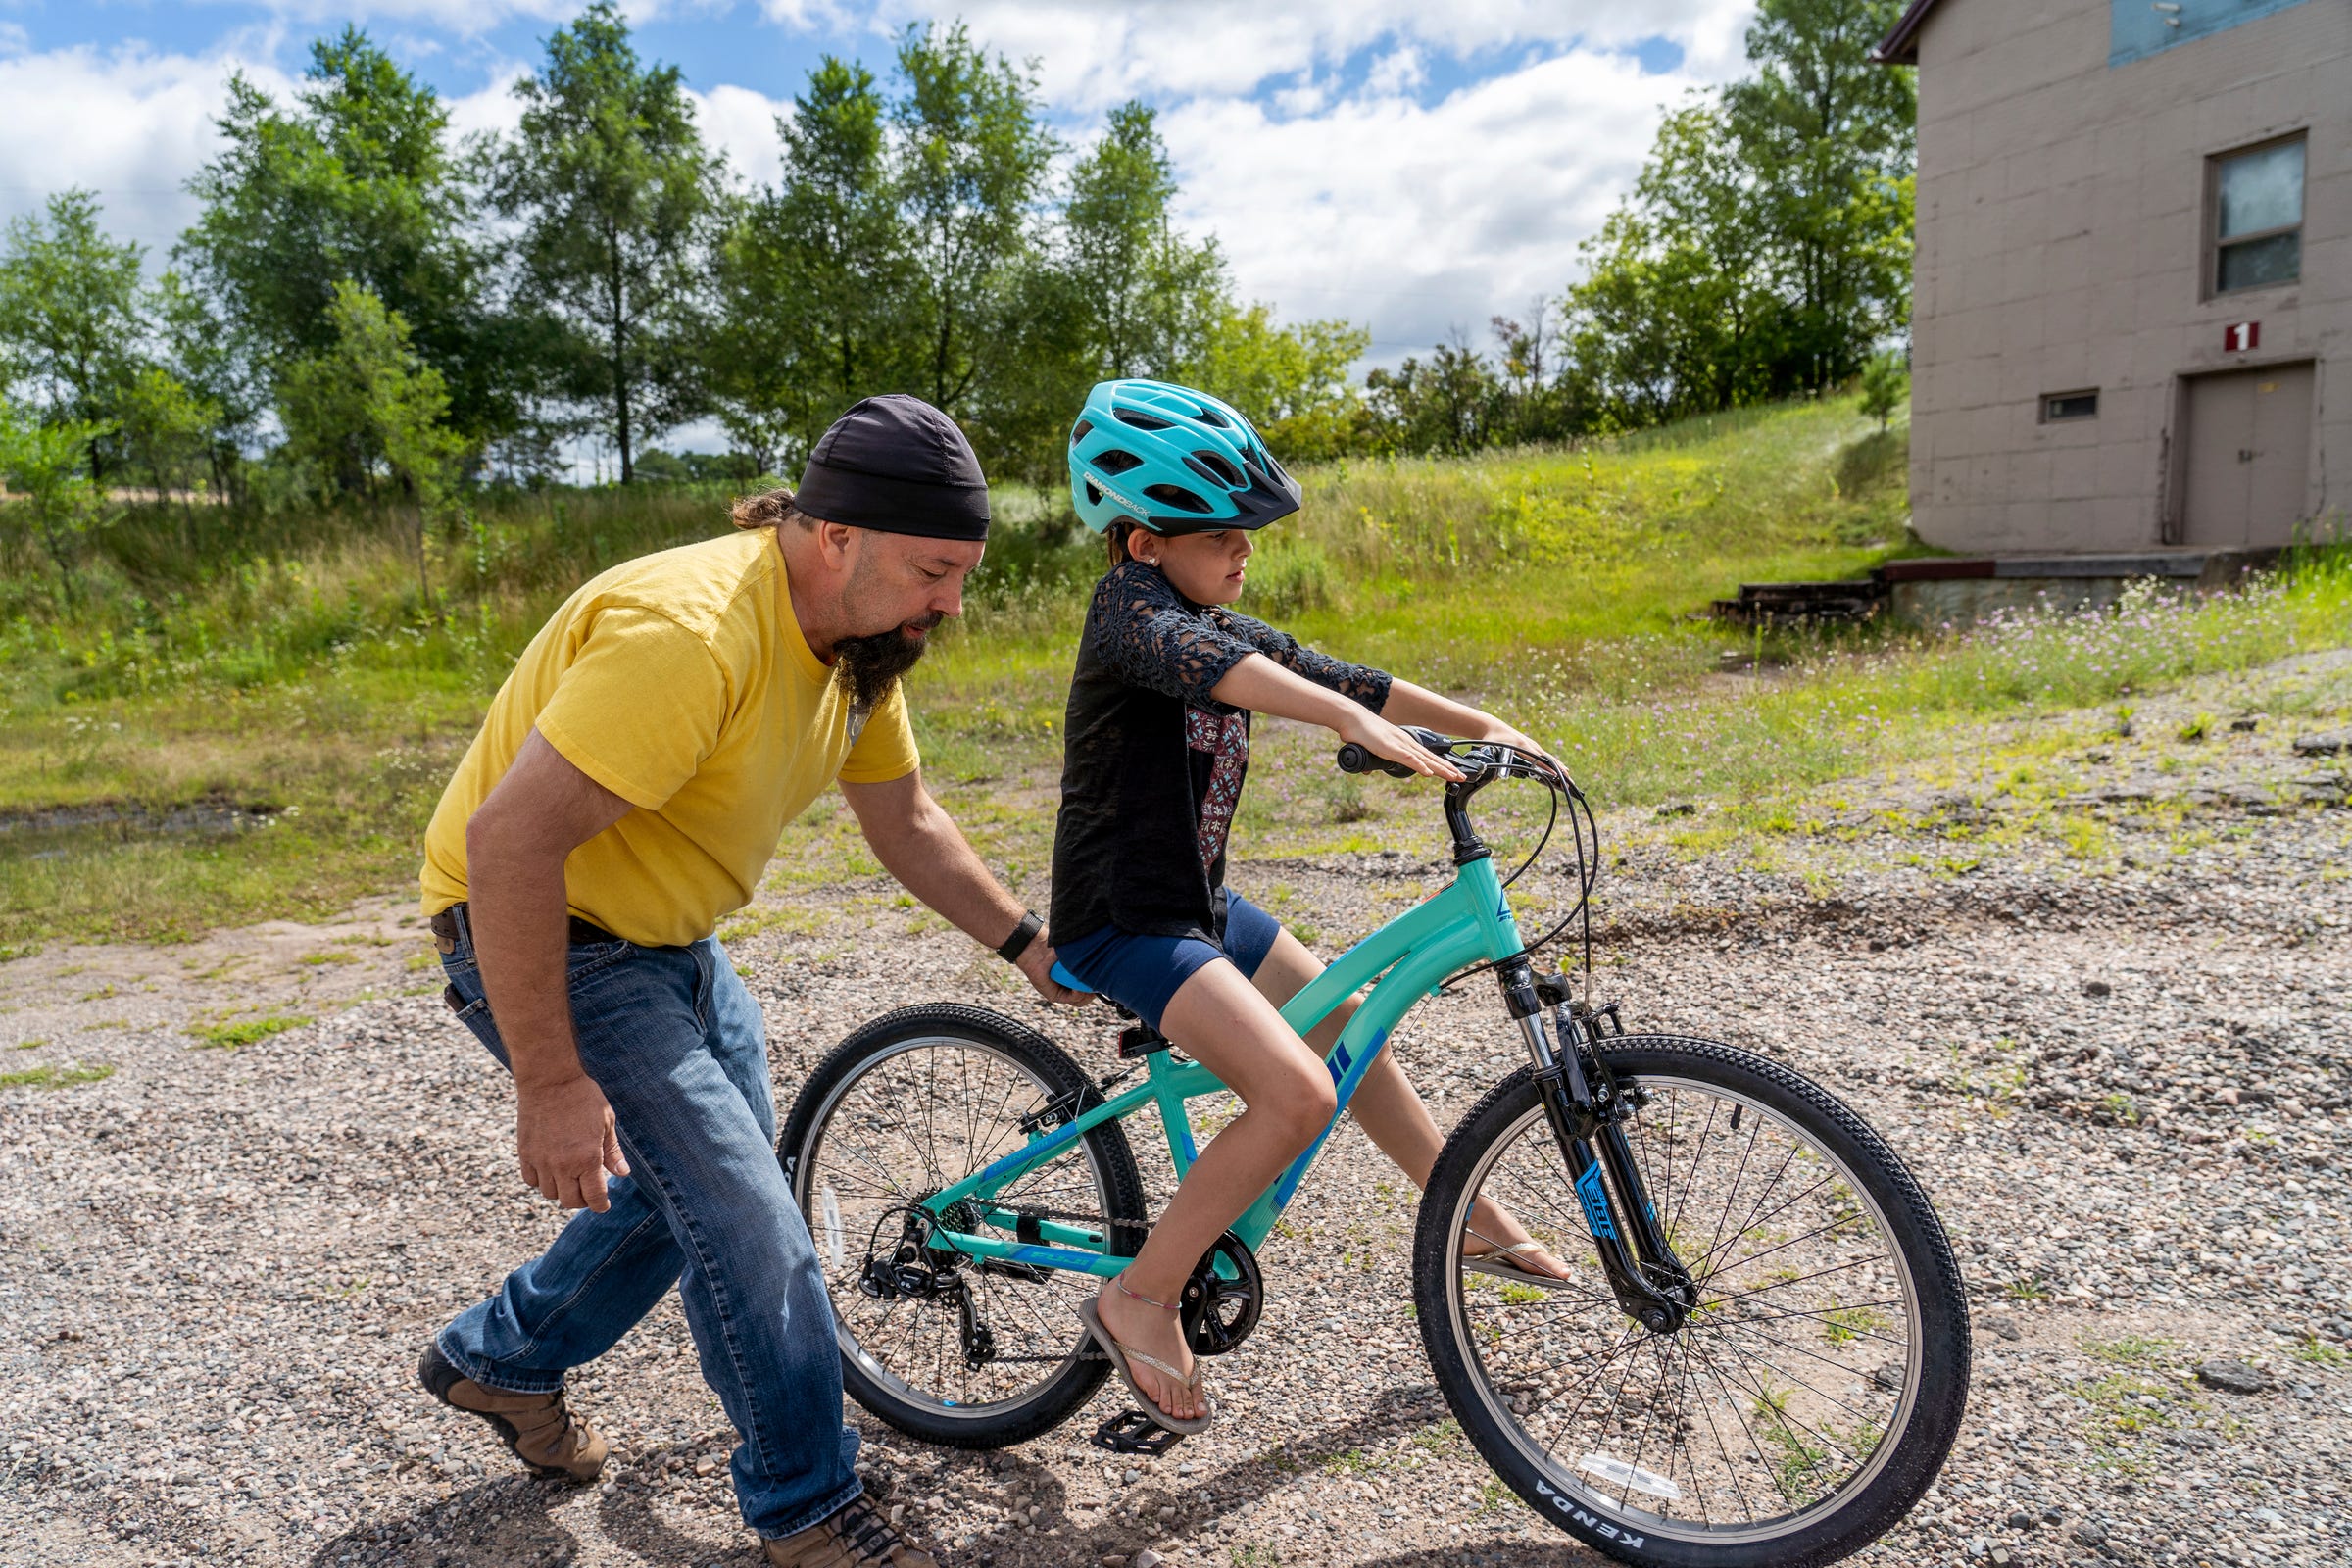 Steven Pringle, owner of Build a Bicycle - Bicycle Therapy, helps Kadence Horton, 8, of Iron River learn to ride her new bike outside of his shop in Michigan's Upper Peninsula on Friday, July 29, 2022. Pringle gave the bike and helmet to her for free after learning she and her mother had fled a domestic violence situation in New York with just the clothes on their backs.